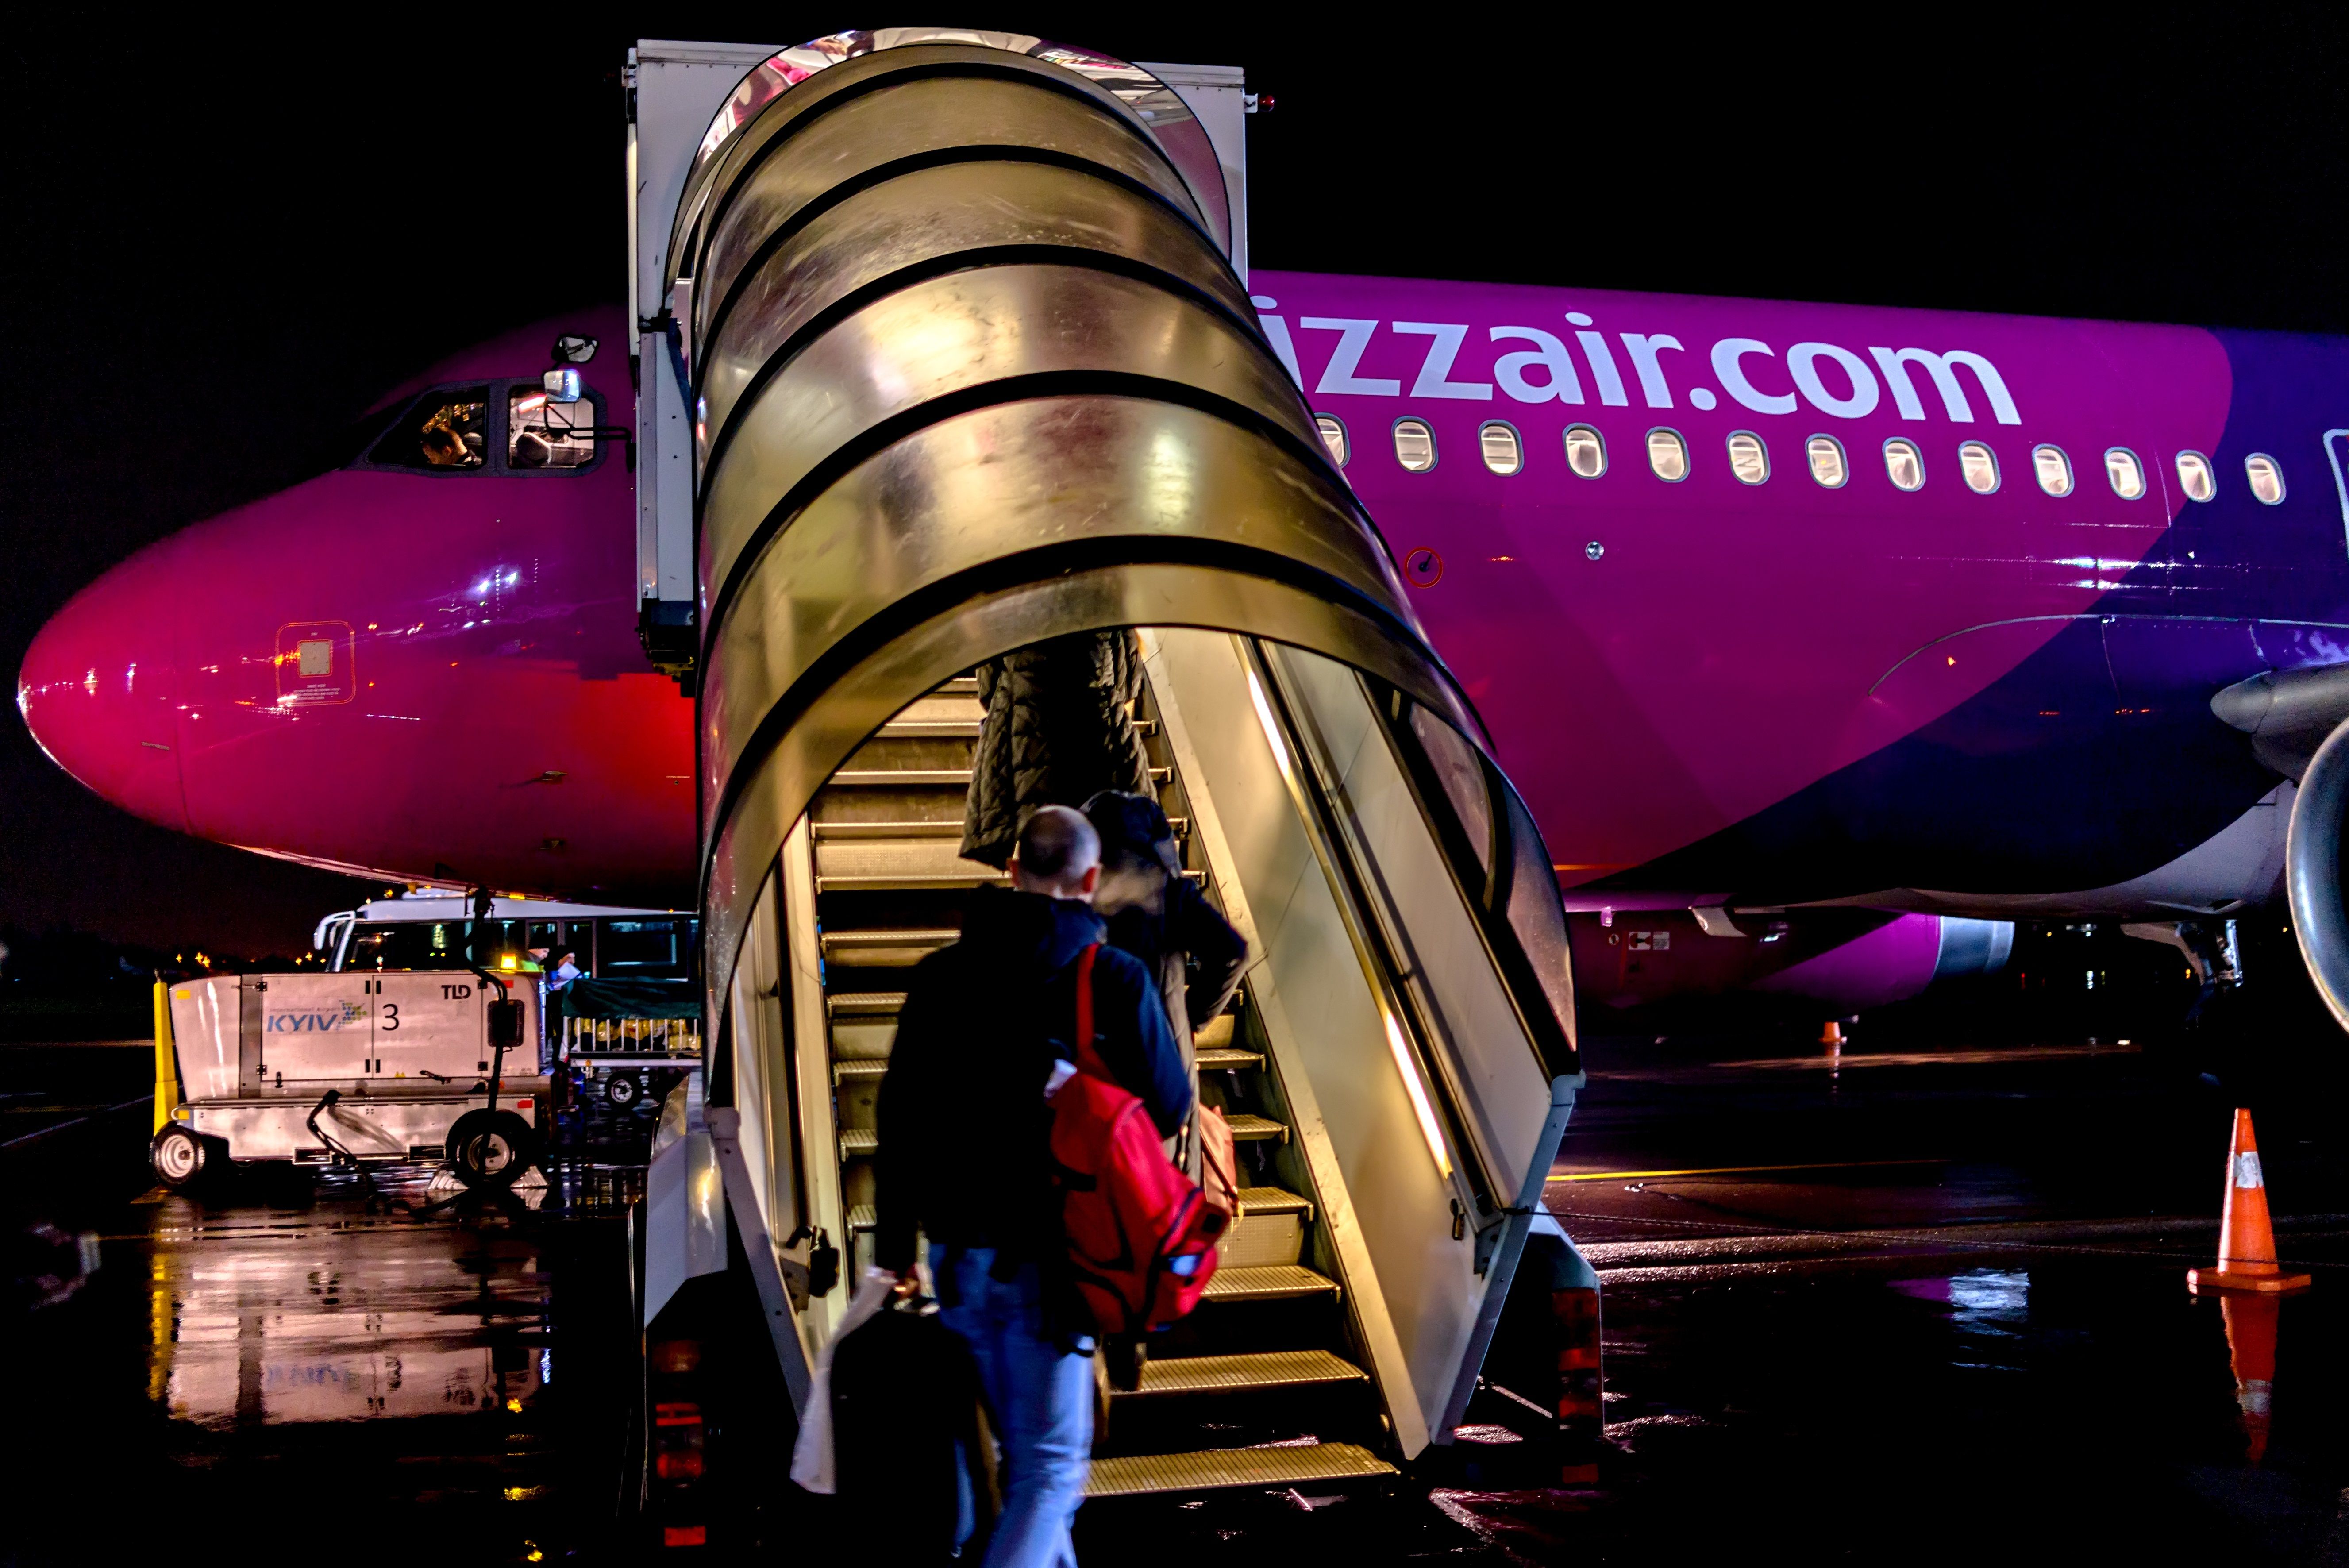 Wizz Air at night